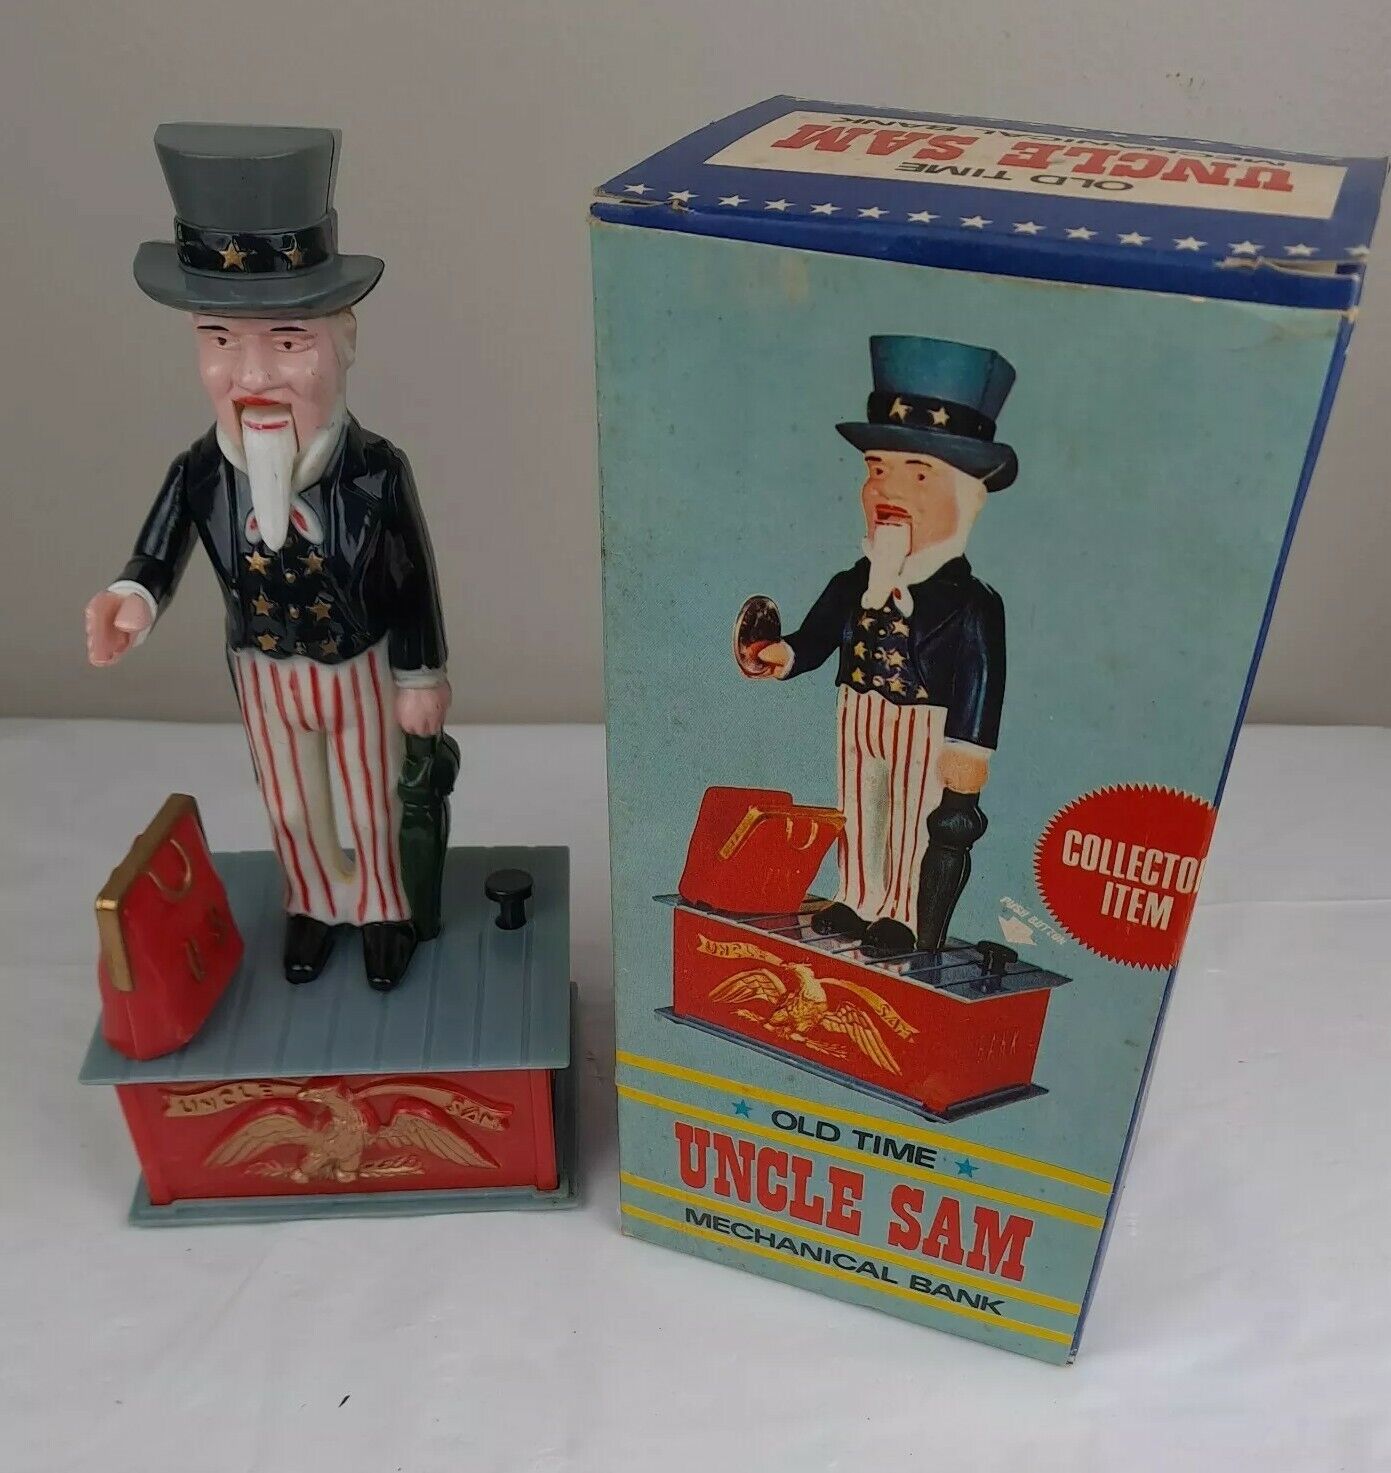 1975 Old Time Uncle Sam Mechanical Coin Bank. New. Original Box. Works Plastic